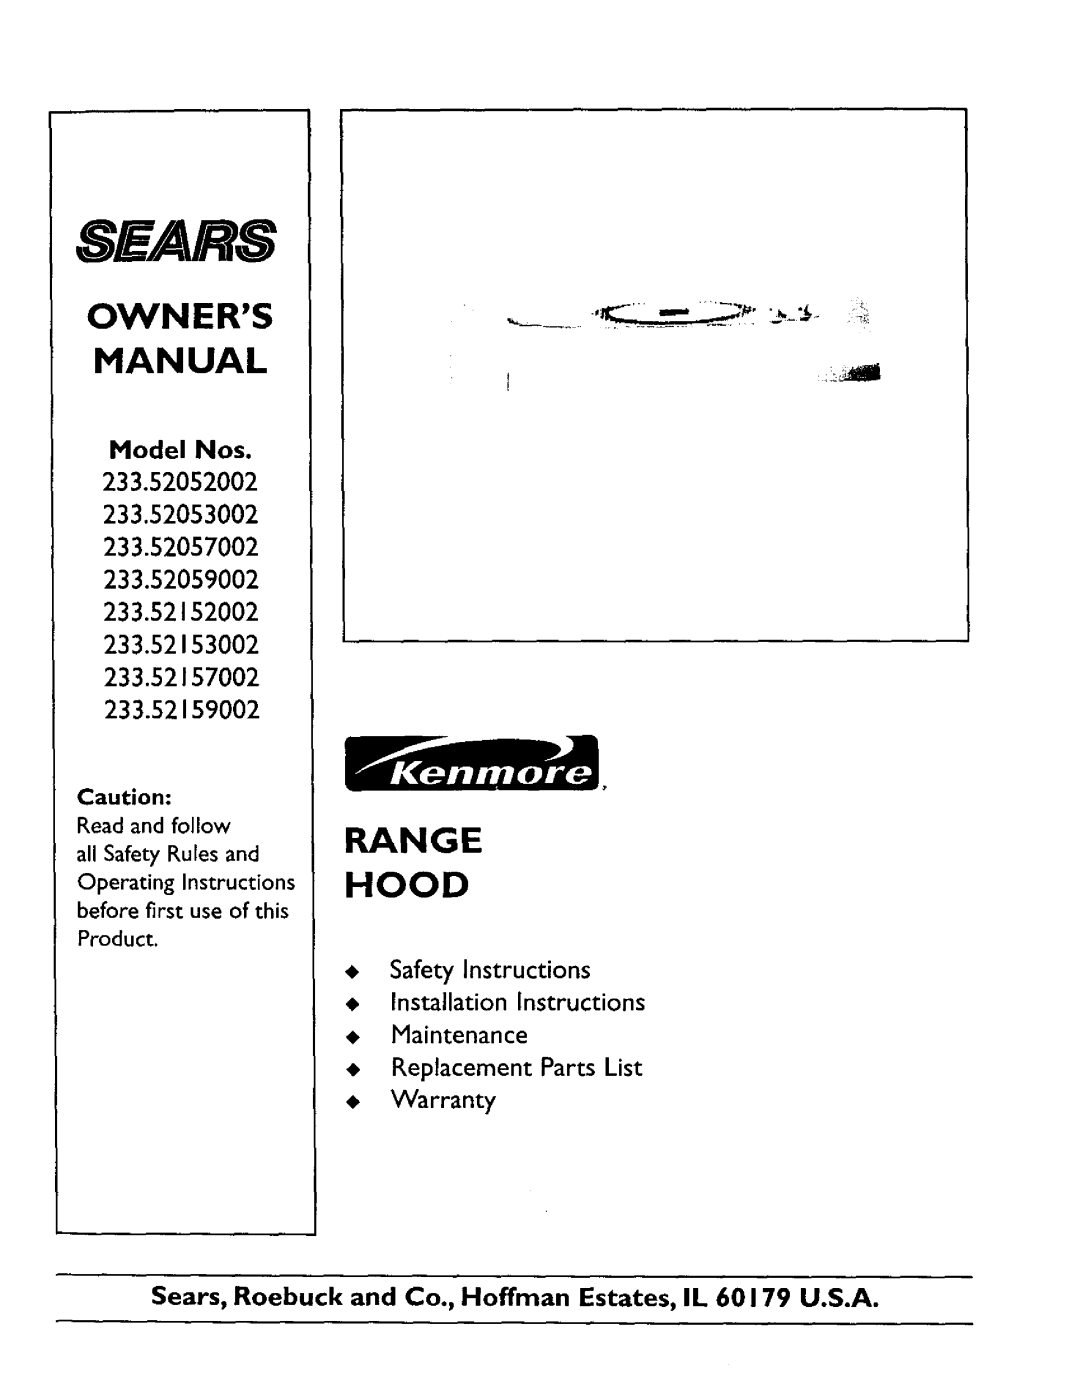 Sears 233.52059 owner manual Owners Man Ual, Range Hood, Model Nos, Read and follow all Safety Rules and, Product 